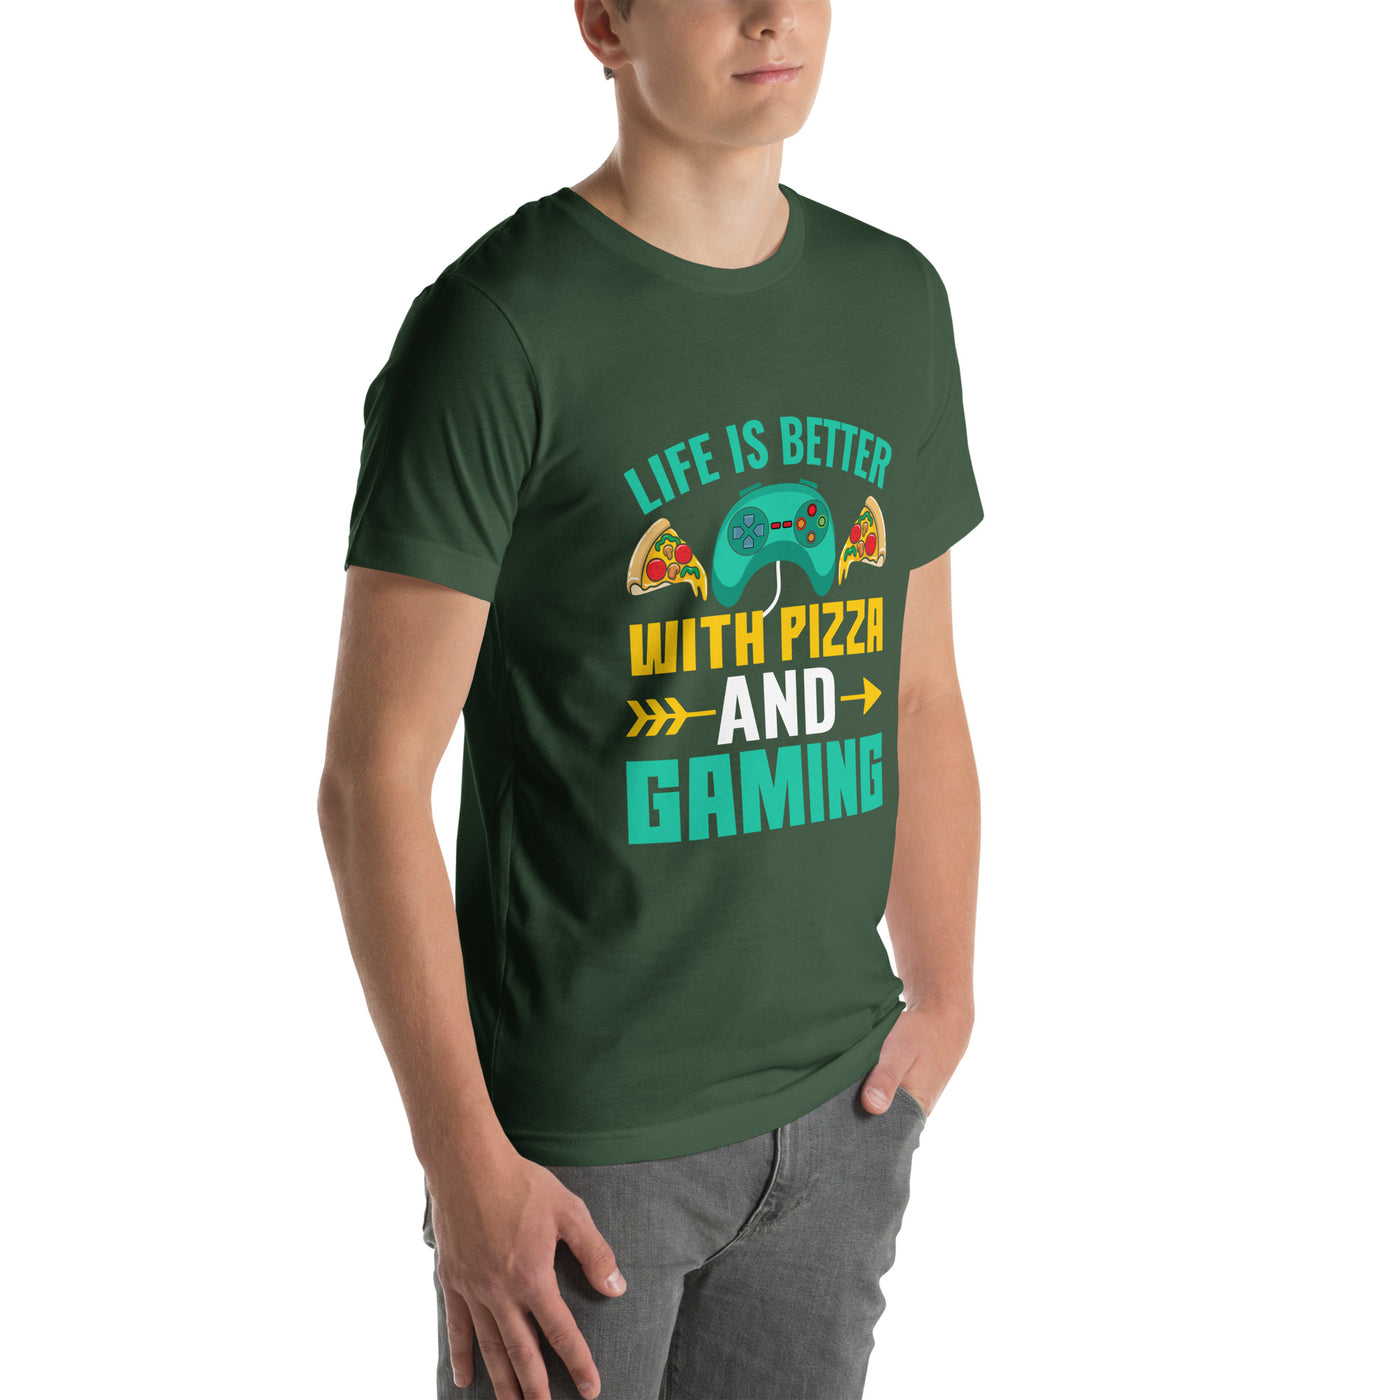 Life is Better With Pizza and Gaming Rima 14 - Unisex t-shirt